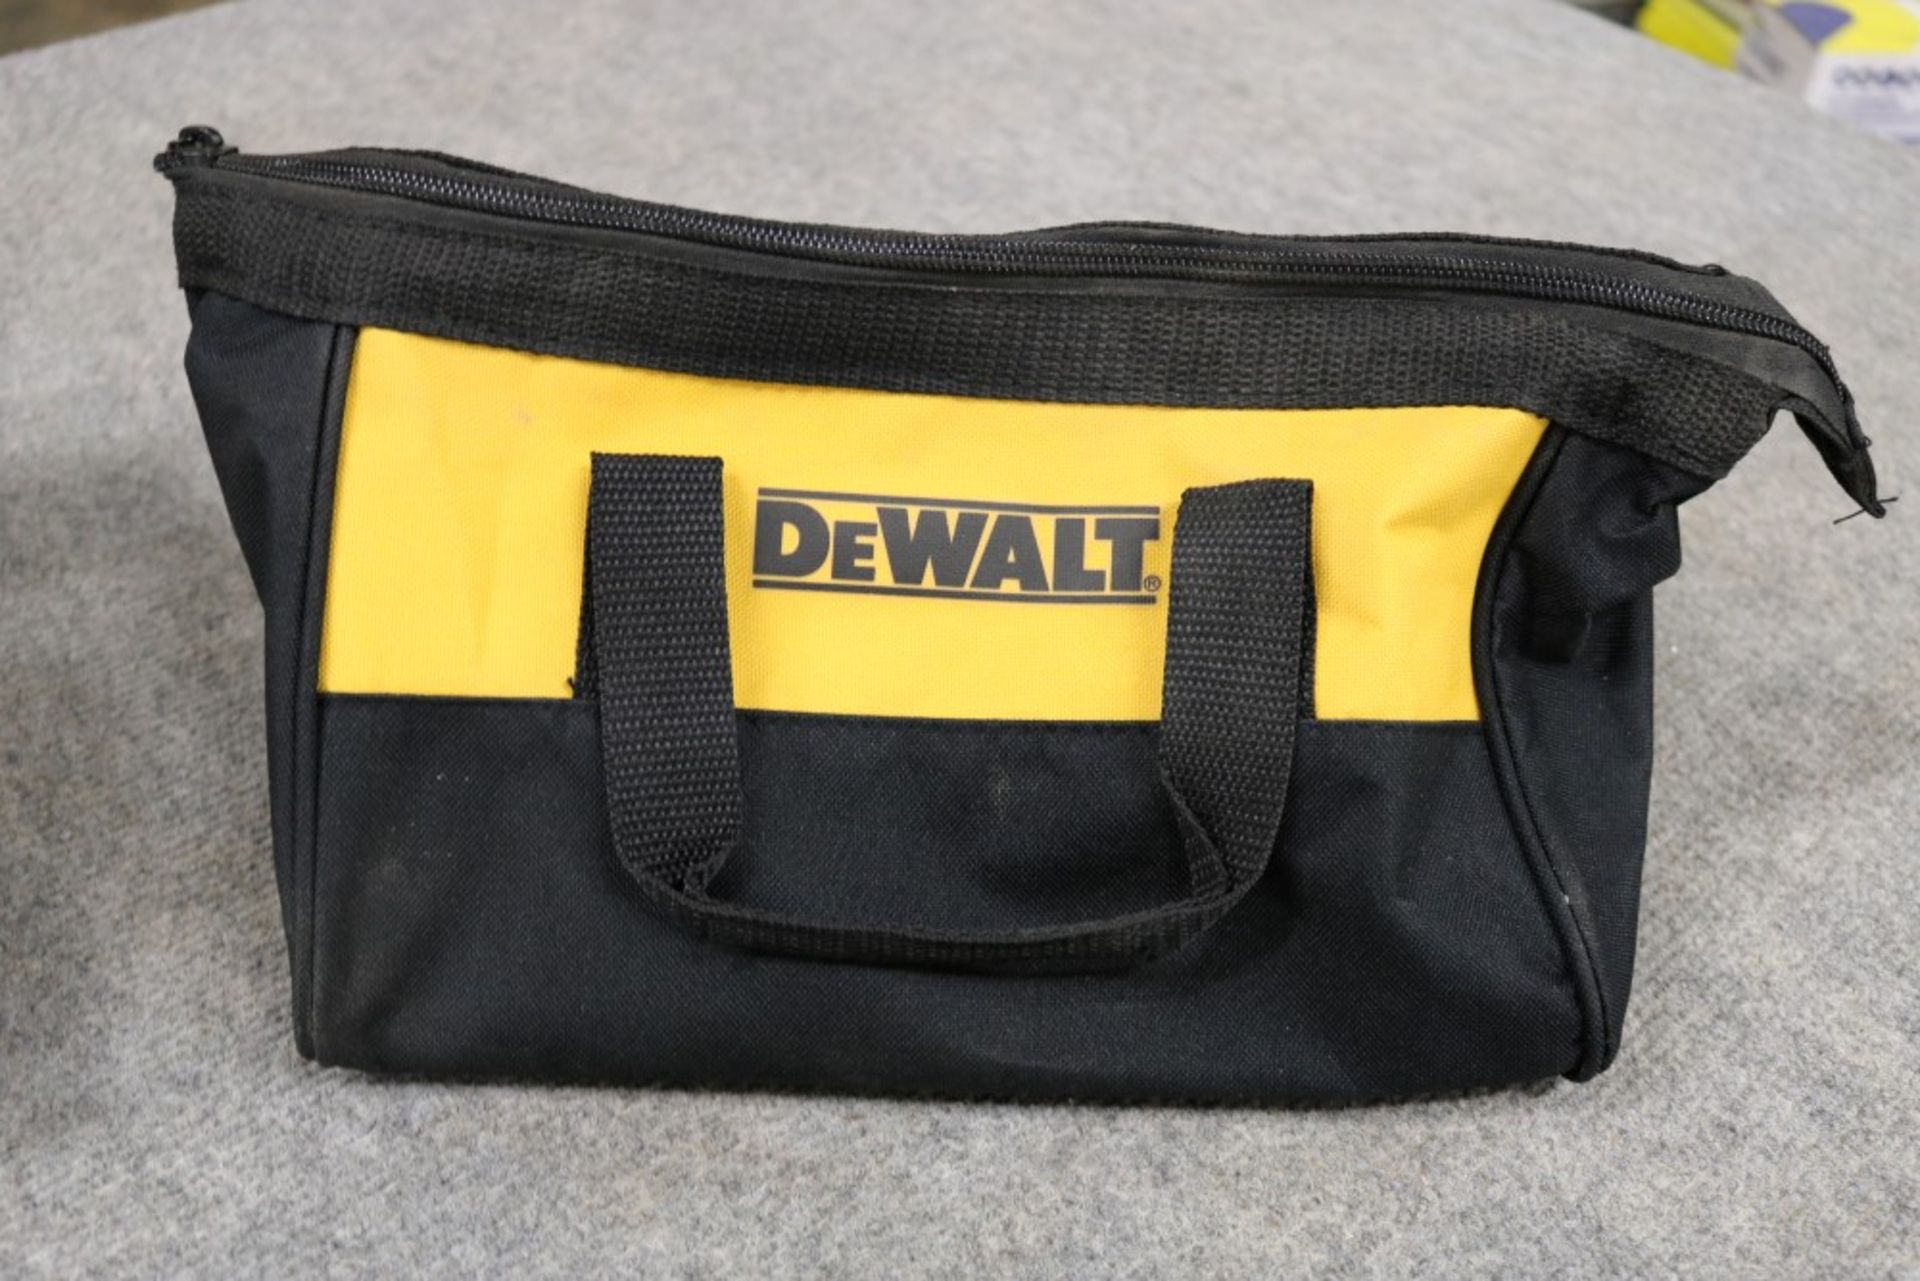 (2) DeWalt 20v Max Lithium Ion Drills with 2 Extra Batteries with Chargers and Bag - Image 2 of 8